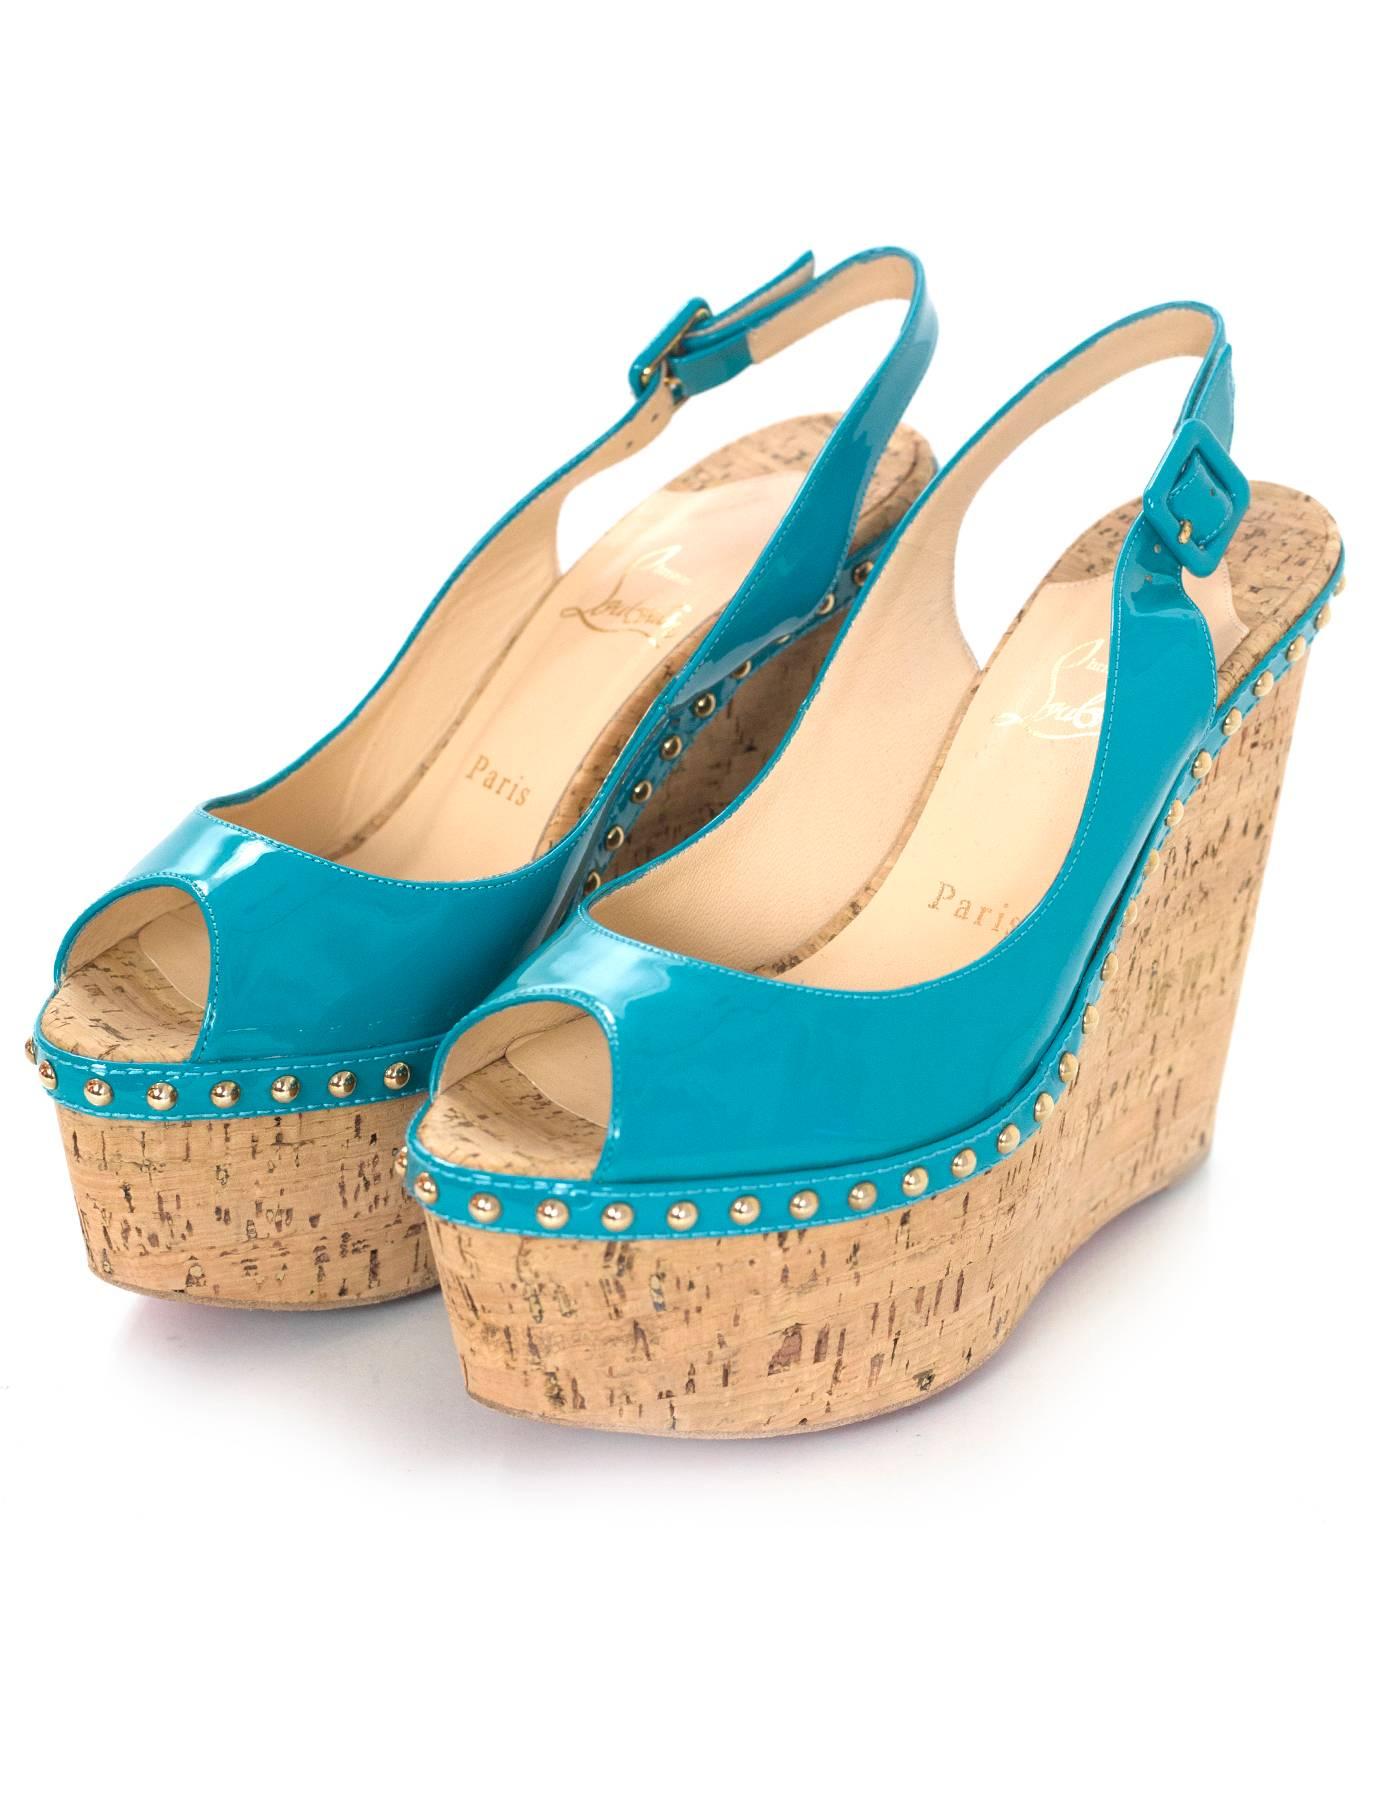 Christian Louboutin Turquoise Patent Leather Peep-Toe Wedges Sz 38
Features studding detail

Made In: Italy
Color: Turquoise, tan
Materials: Patent leather, cork
Closure/Opening: Slingback strap
Sole Stamp: Christian Louboutin MADE IN ITALY